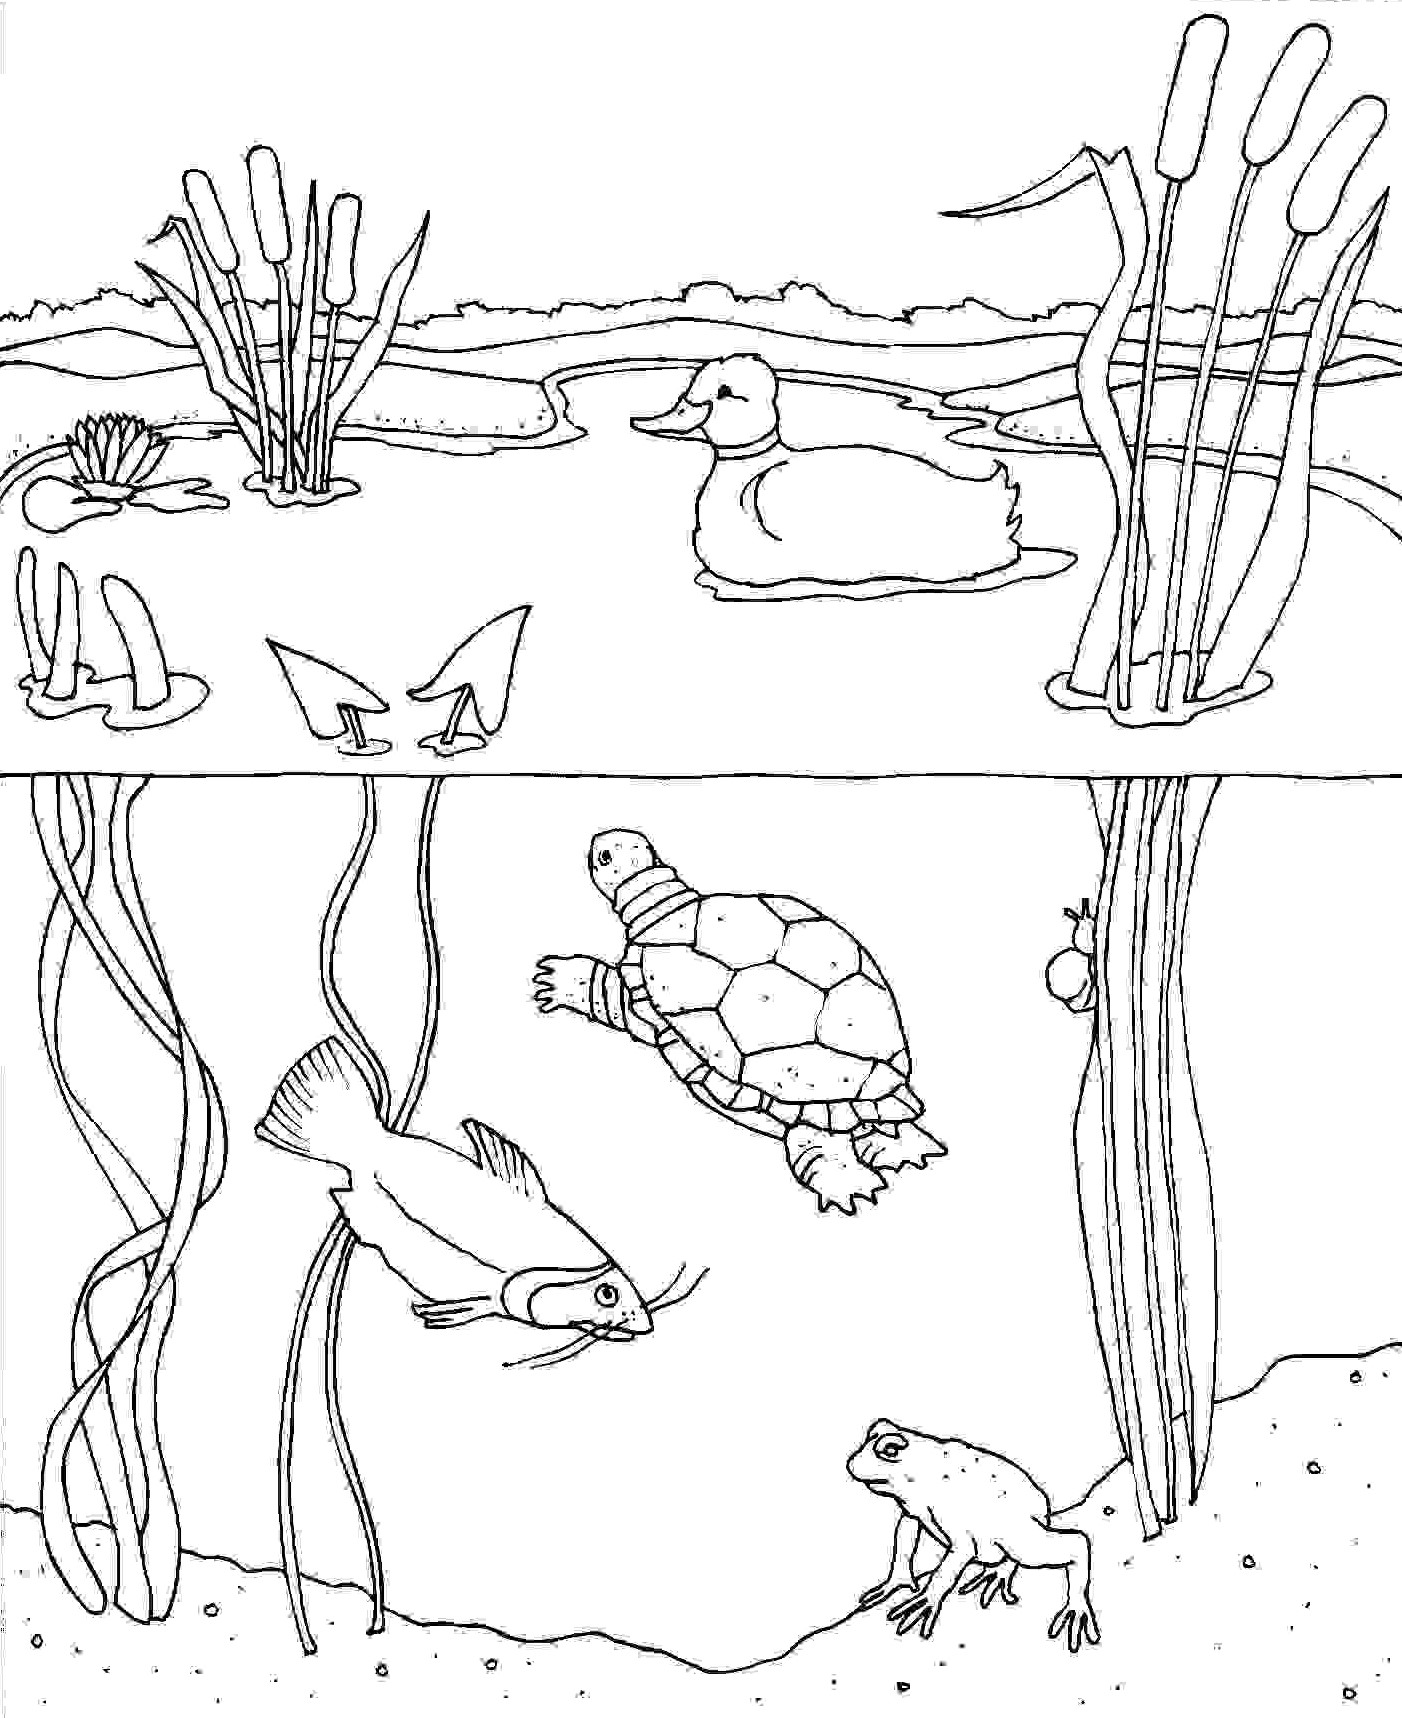 ocean-animal-habitat-coloring-pages-coloring-pages